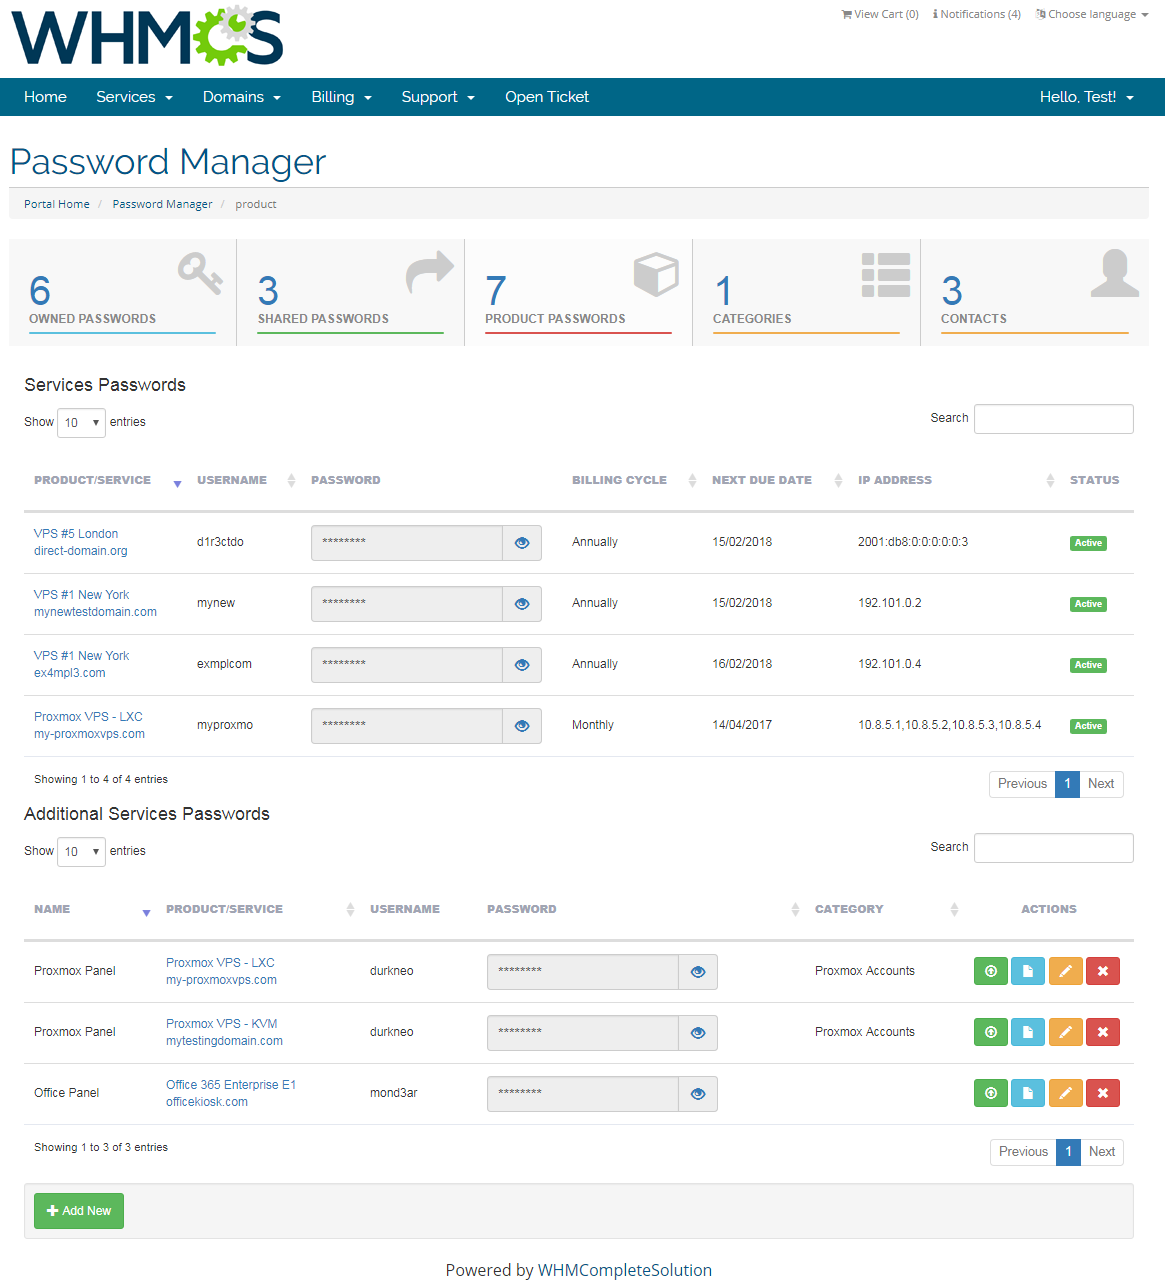 Password Manager For WHMCS: Screen 7